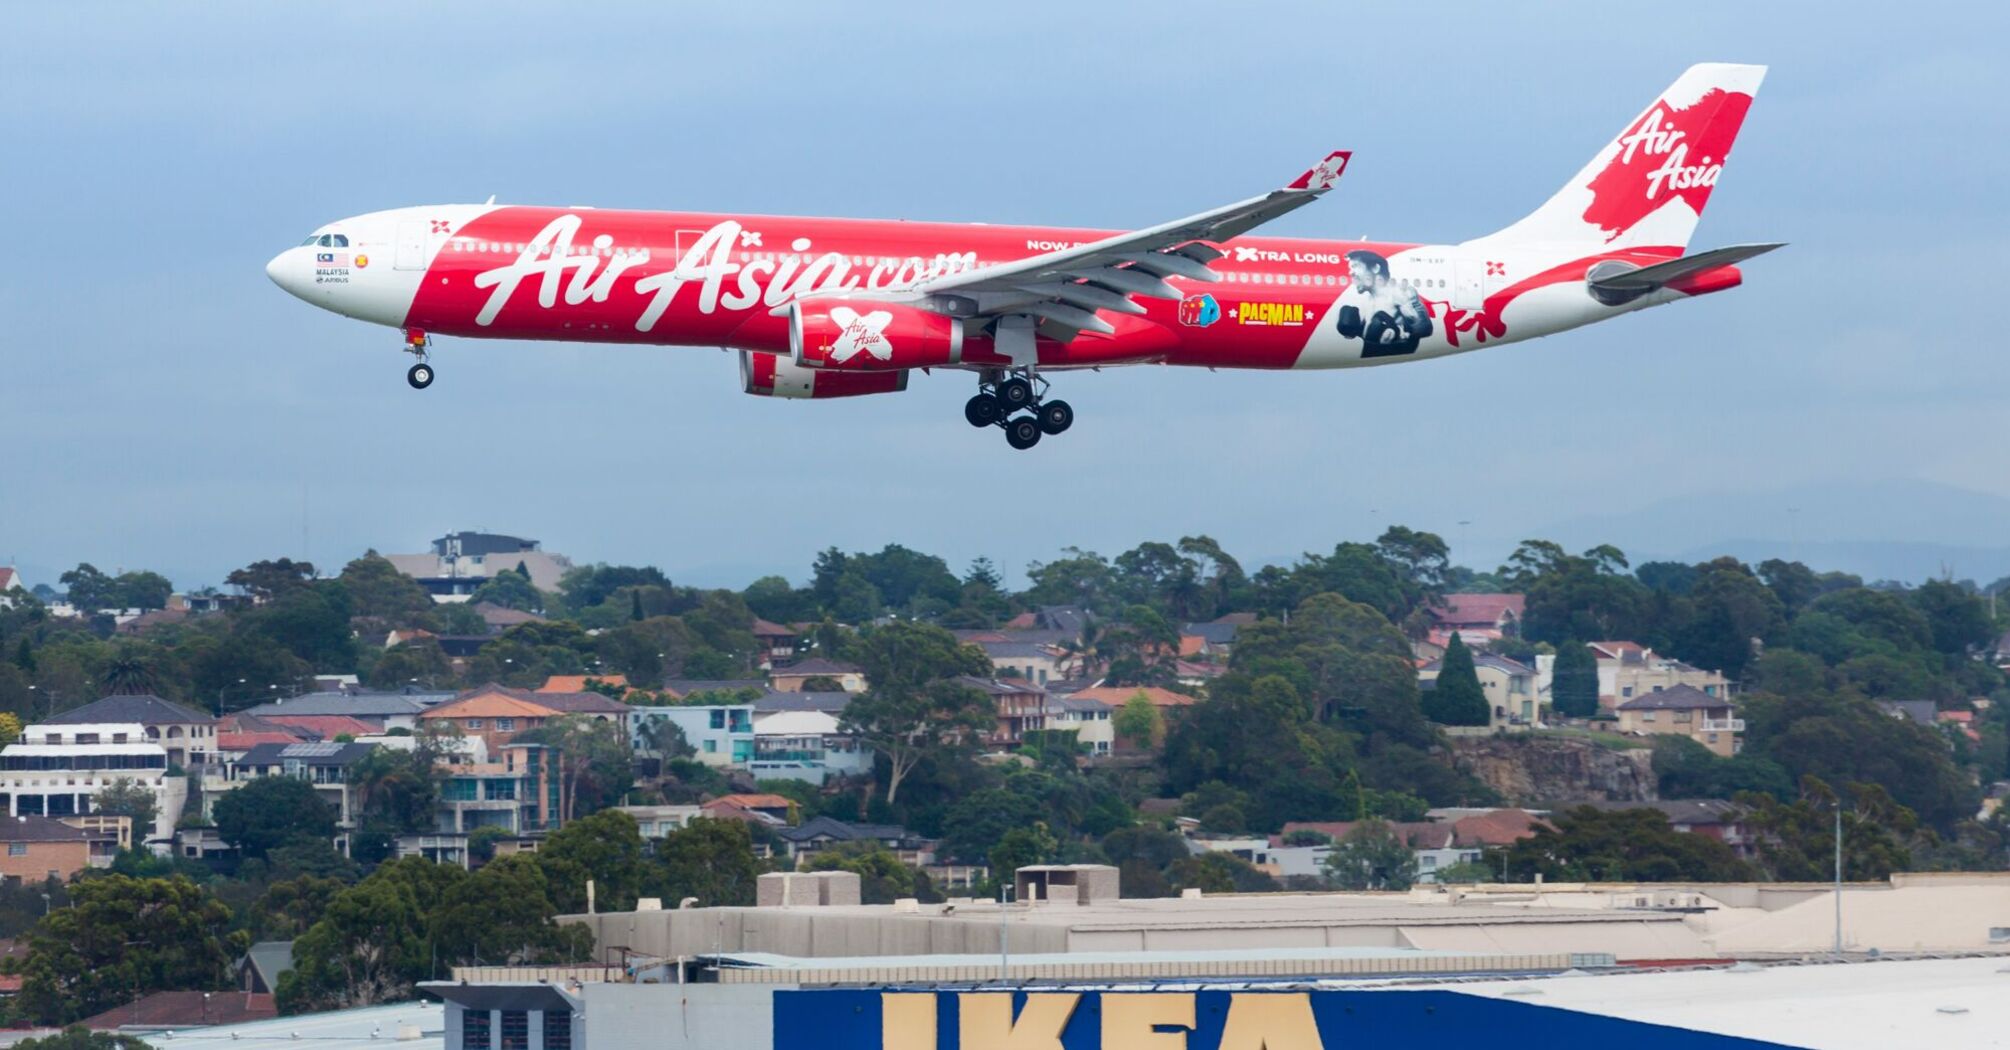 White and red air asia passenger plane above ikea building during daytime